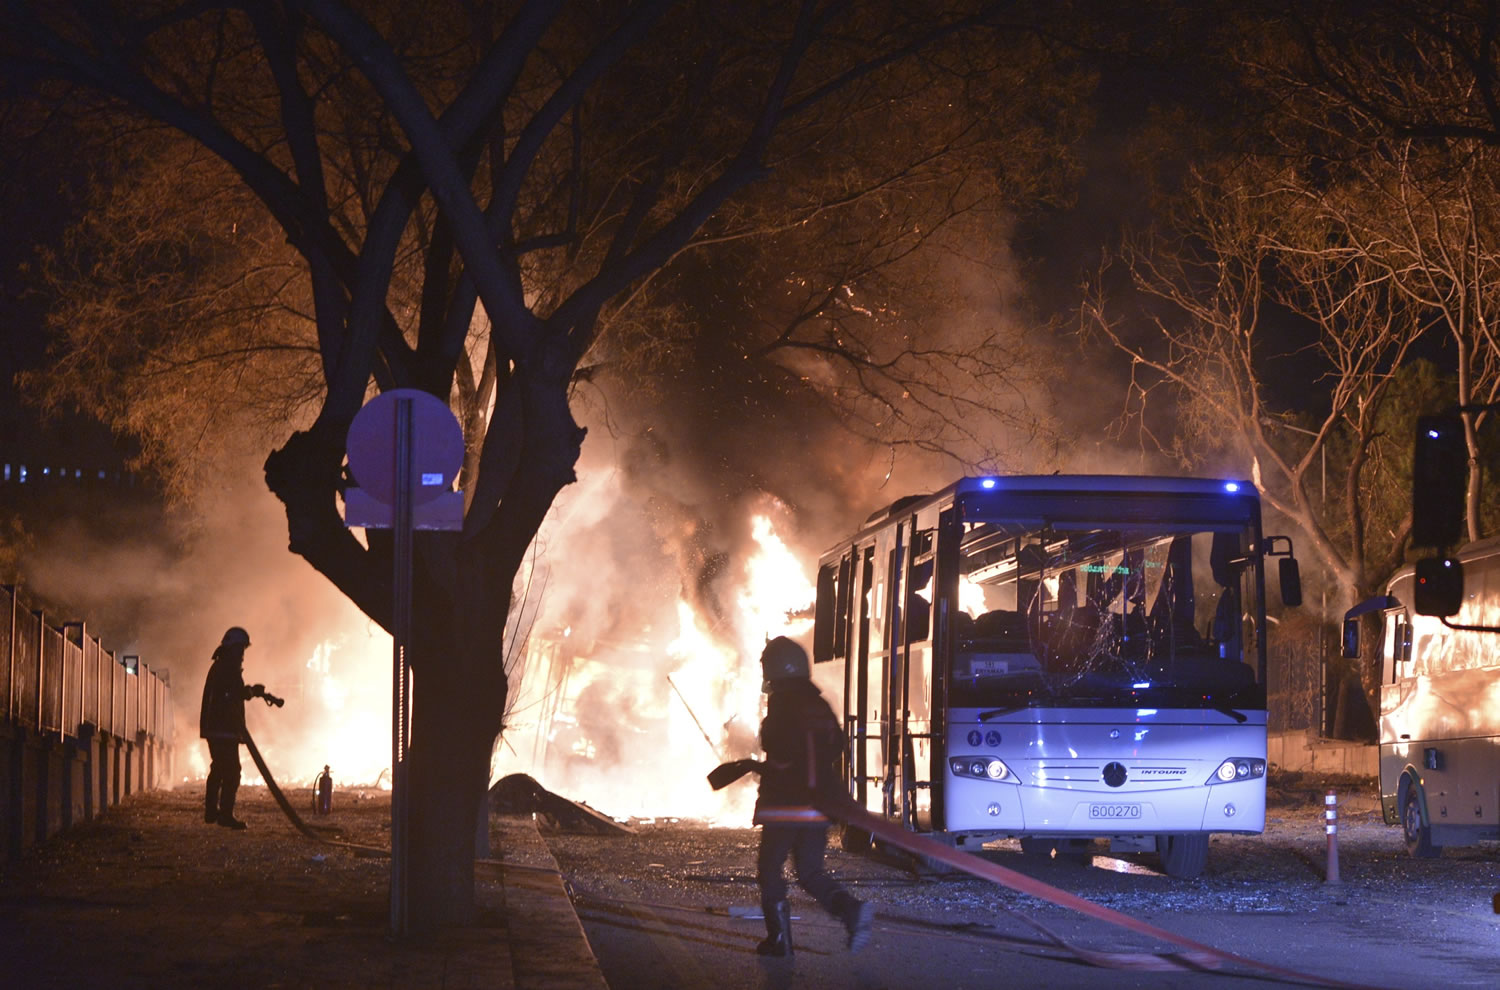 Firefighters work at the scene of a fire from an explosion Wednesday  in Ankara, Turkey. A large explosion, believed to have been caused by a car bomb, killed at least 28 people in the Turkish capital on Wednesday, according to media reports.